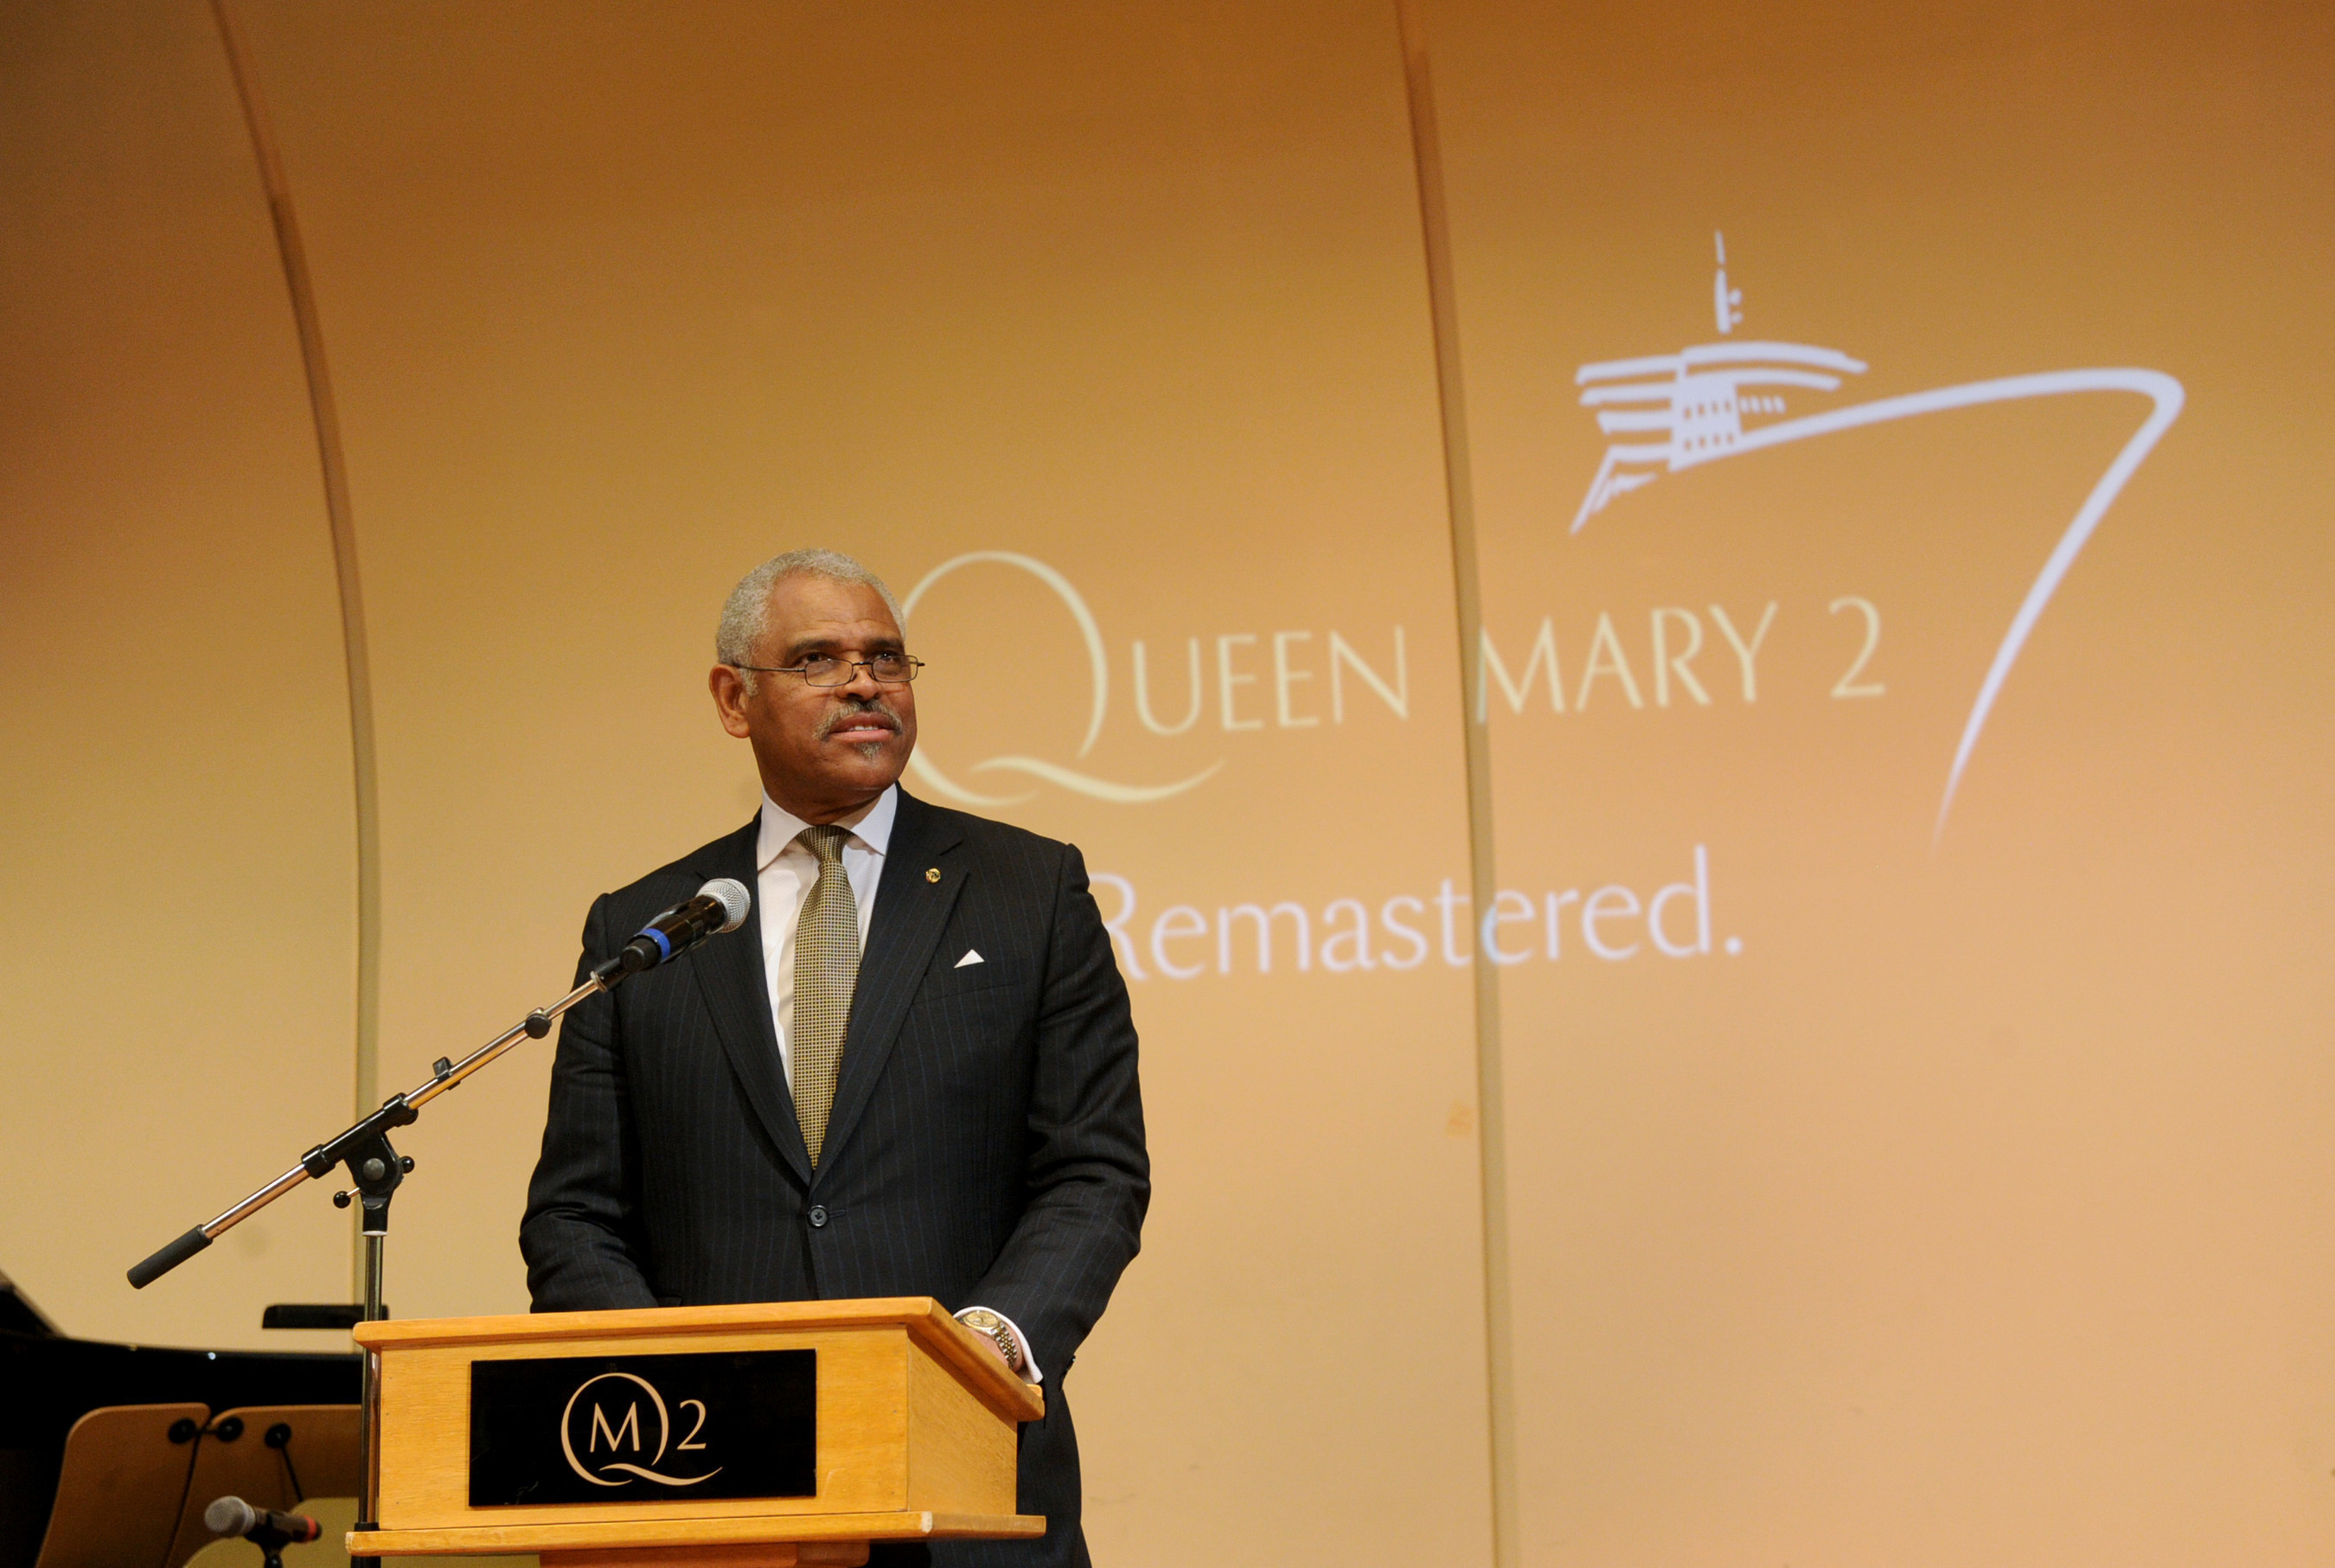 Arnold Donald, CEO, Carnival Corporation, the parent company of Cunard, speaks about the remastered Queen Mary 2, Wednesday, July 6, 2016, at Brooklyn Cruise Terminal in New York, its U.S. homeport. (Diane Bondareff/AP Images for Cunard)